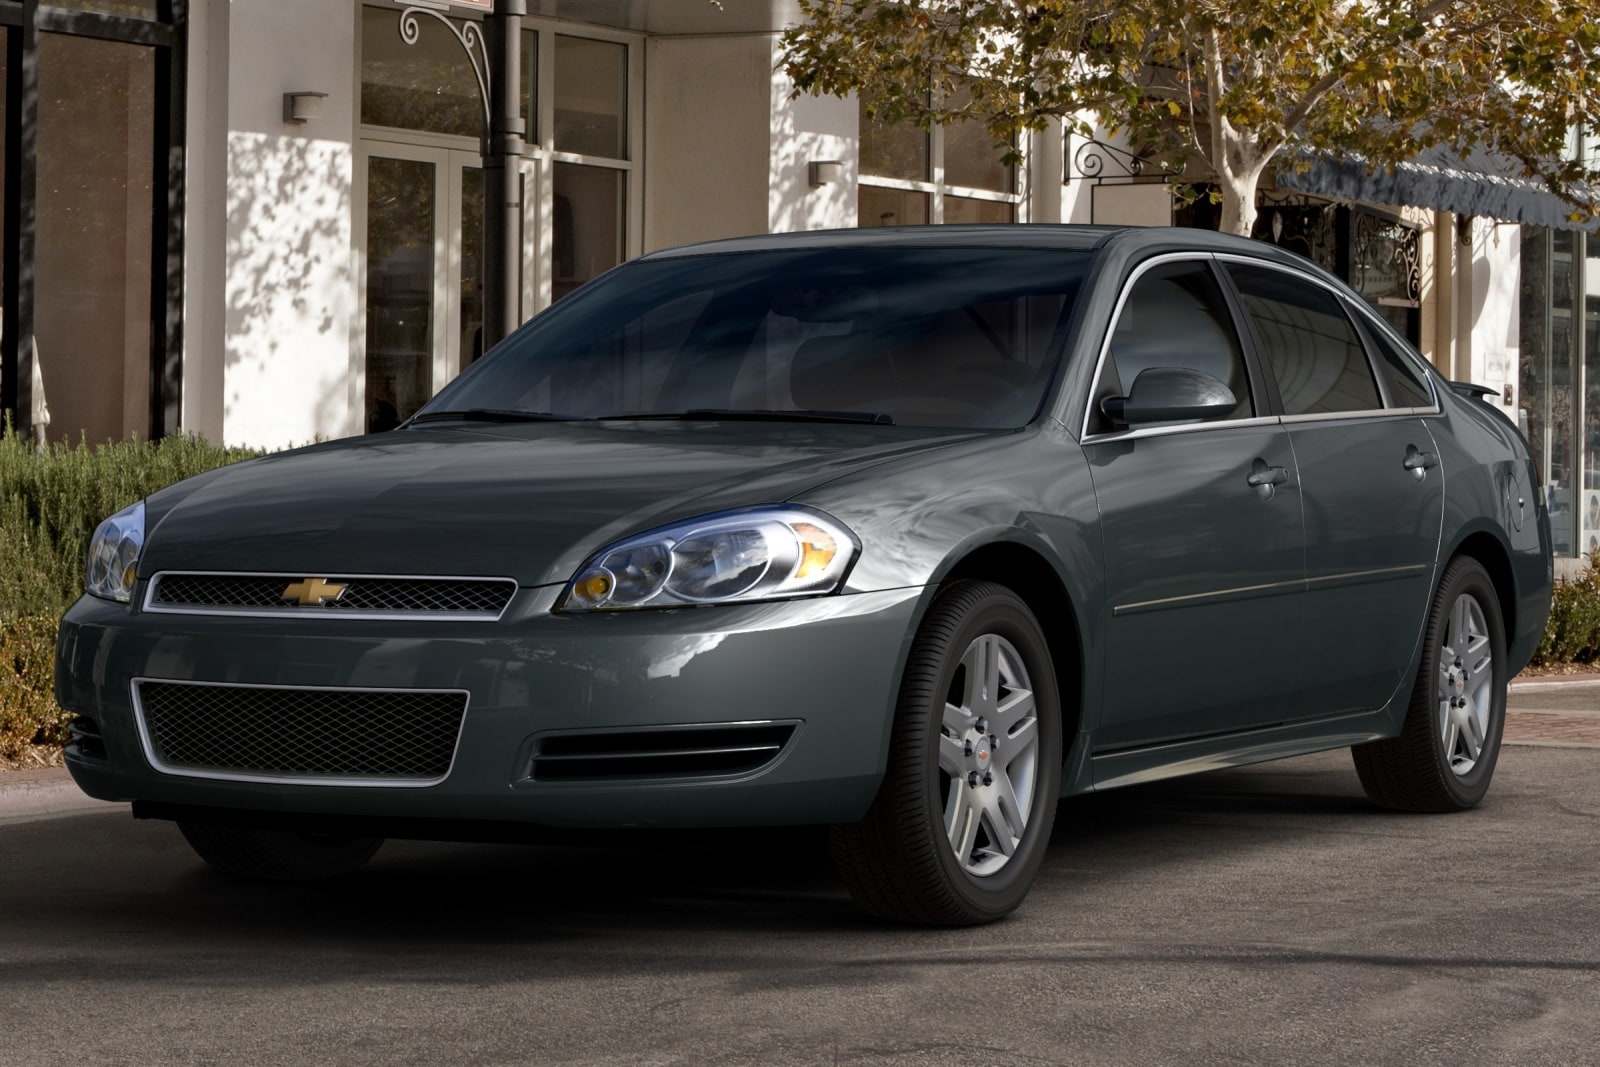 2013 Chevy Impala Review & Ratings | Edmunds